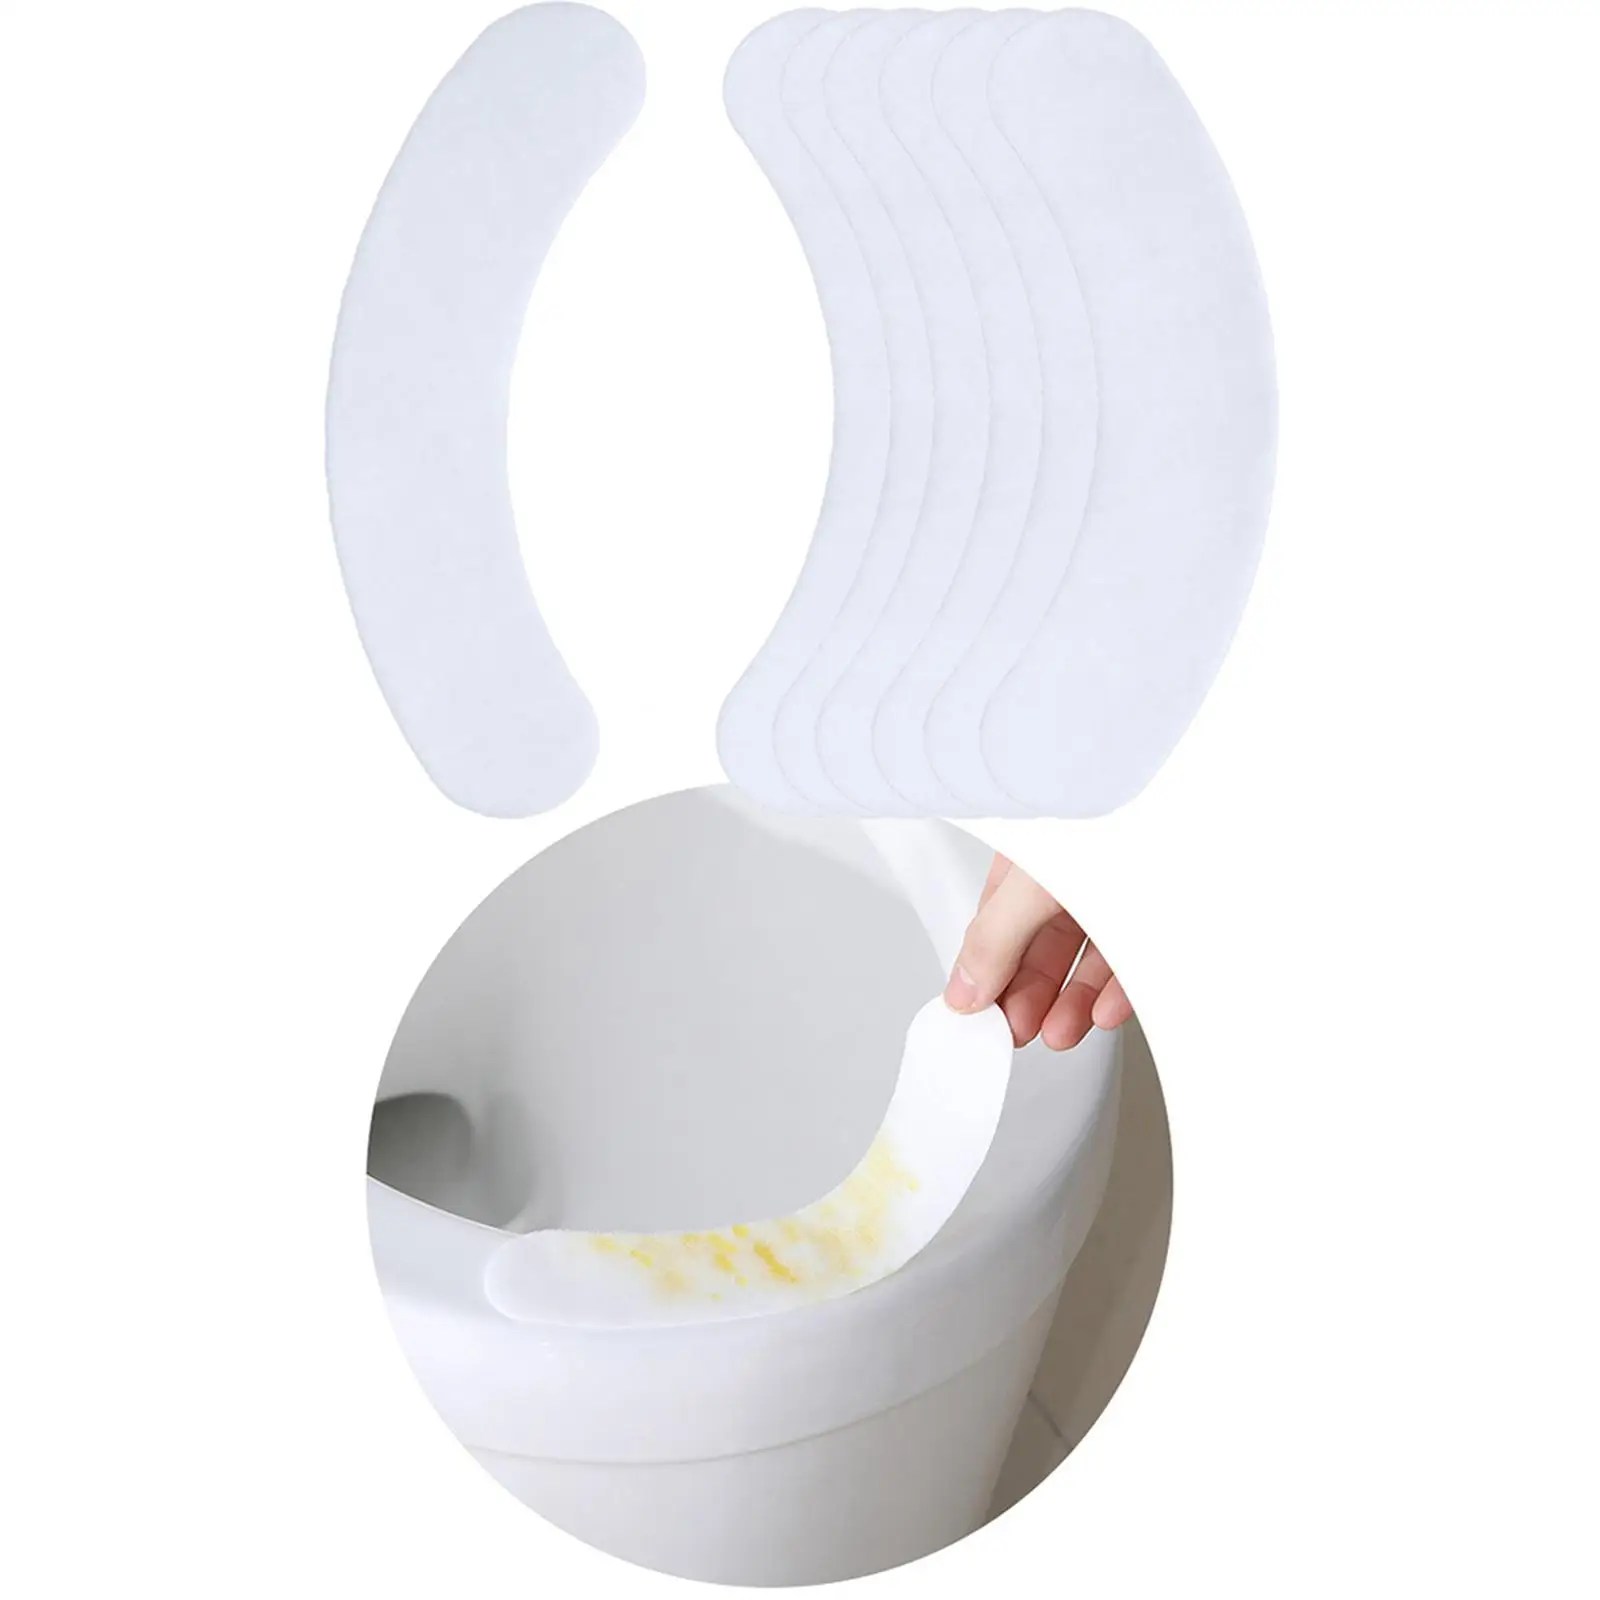 Toilet Pad Comfortable Bathroom Accessories Potty Pad Urine Pad Pad for Traveling Home Use Kids